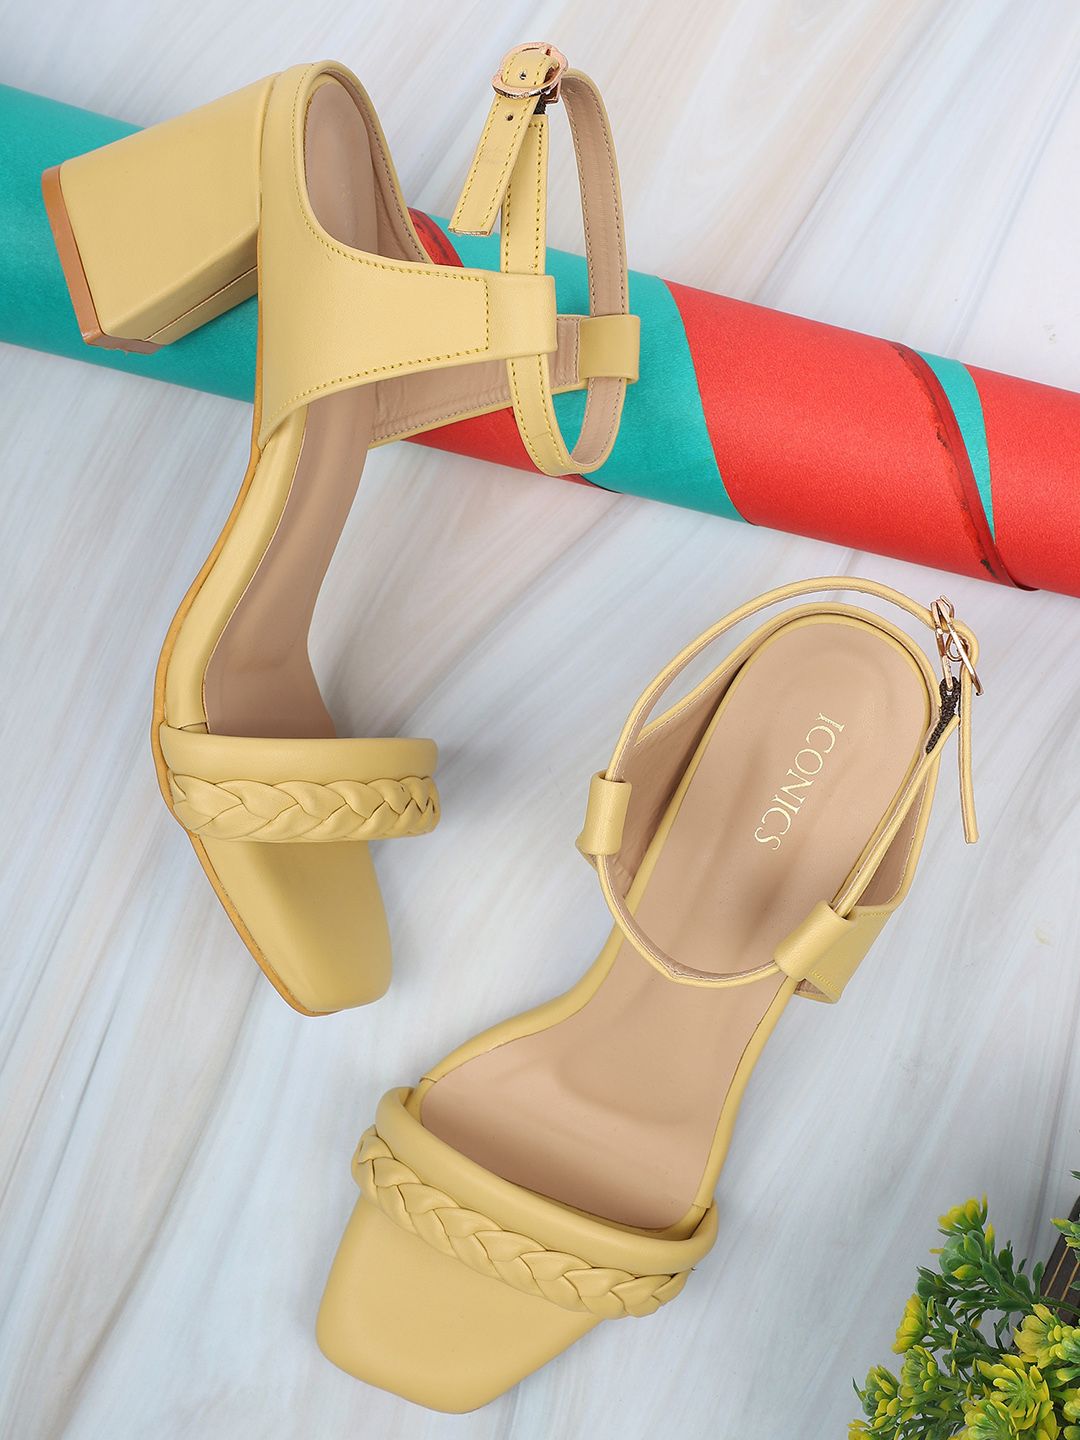 ICONICS Yellow Colourblocked Block Pumps with Buckles Price in India